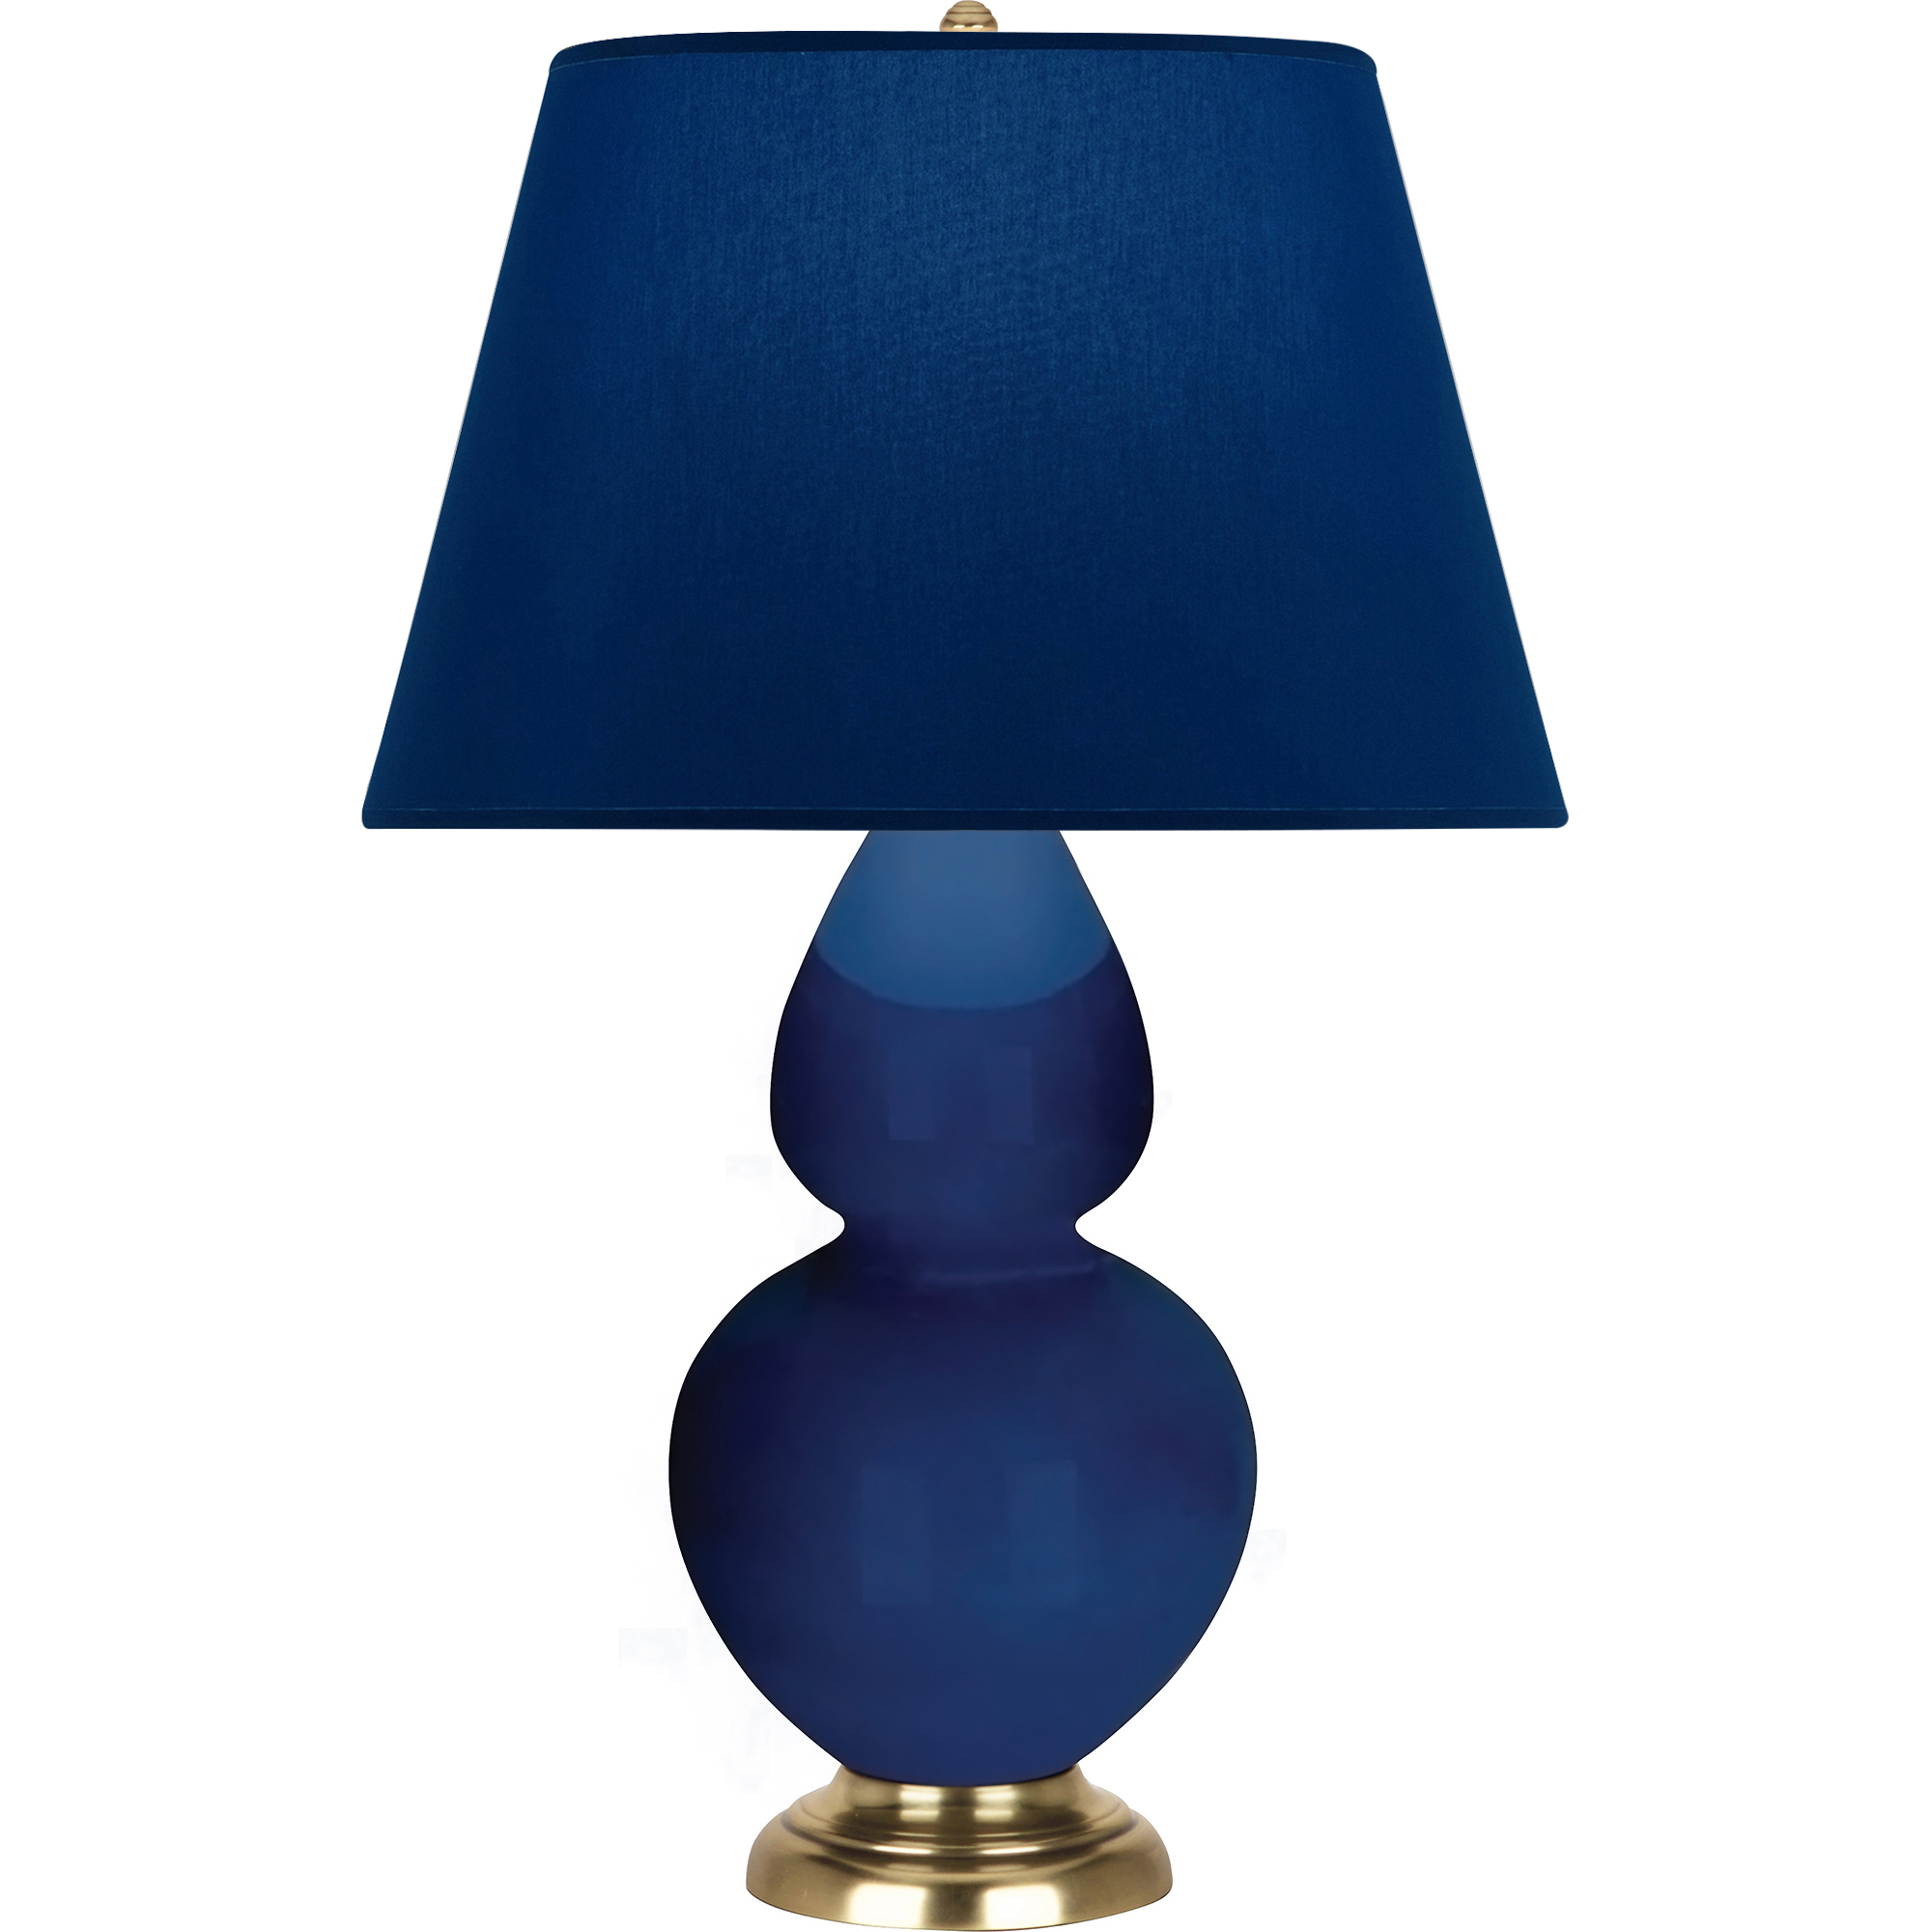 Double Gourd Table Lamp Style #CT20N